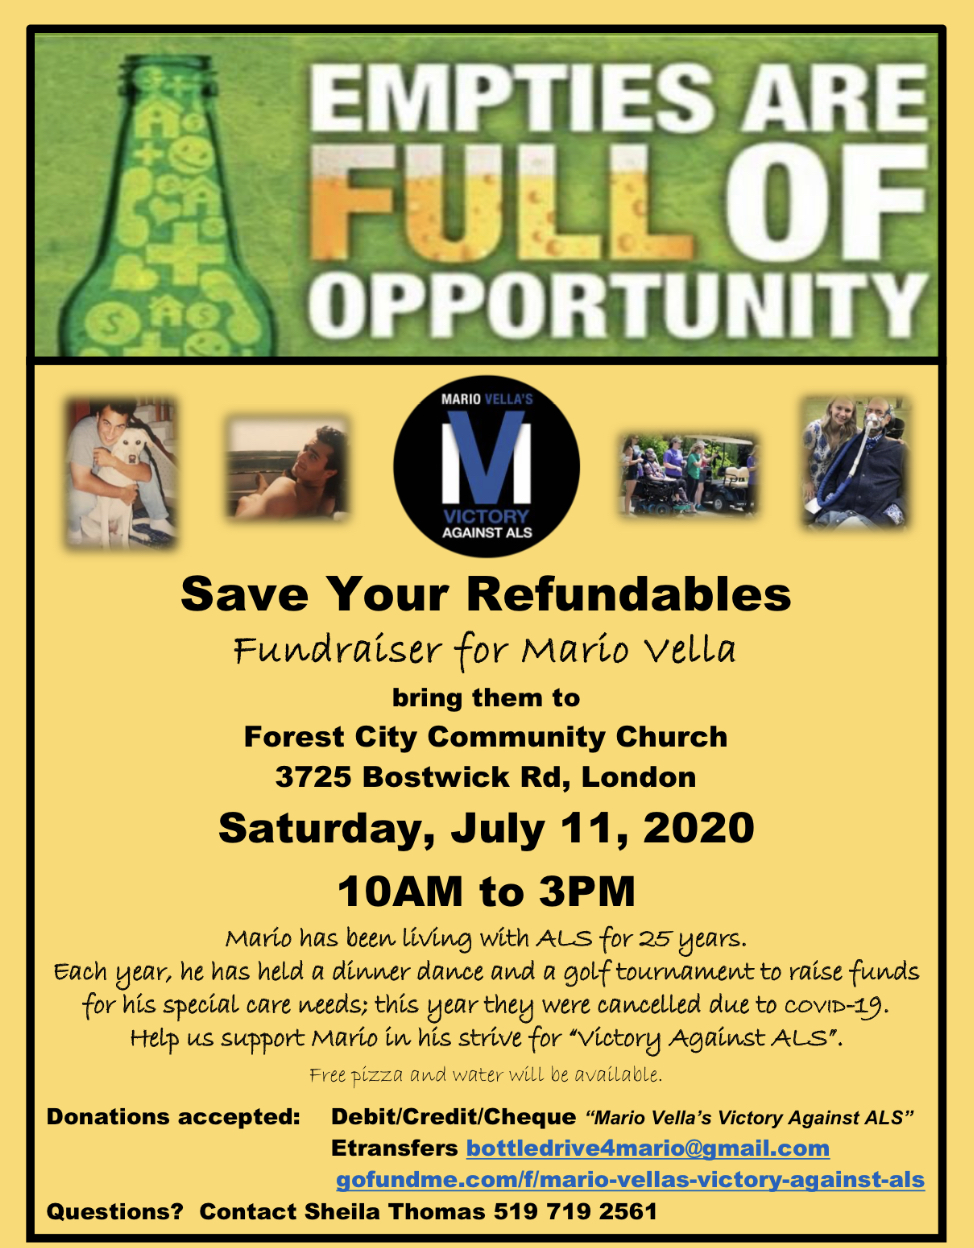 Save Your Refundables Fundraiser! - image